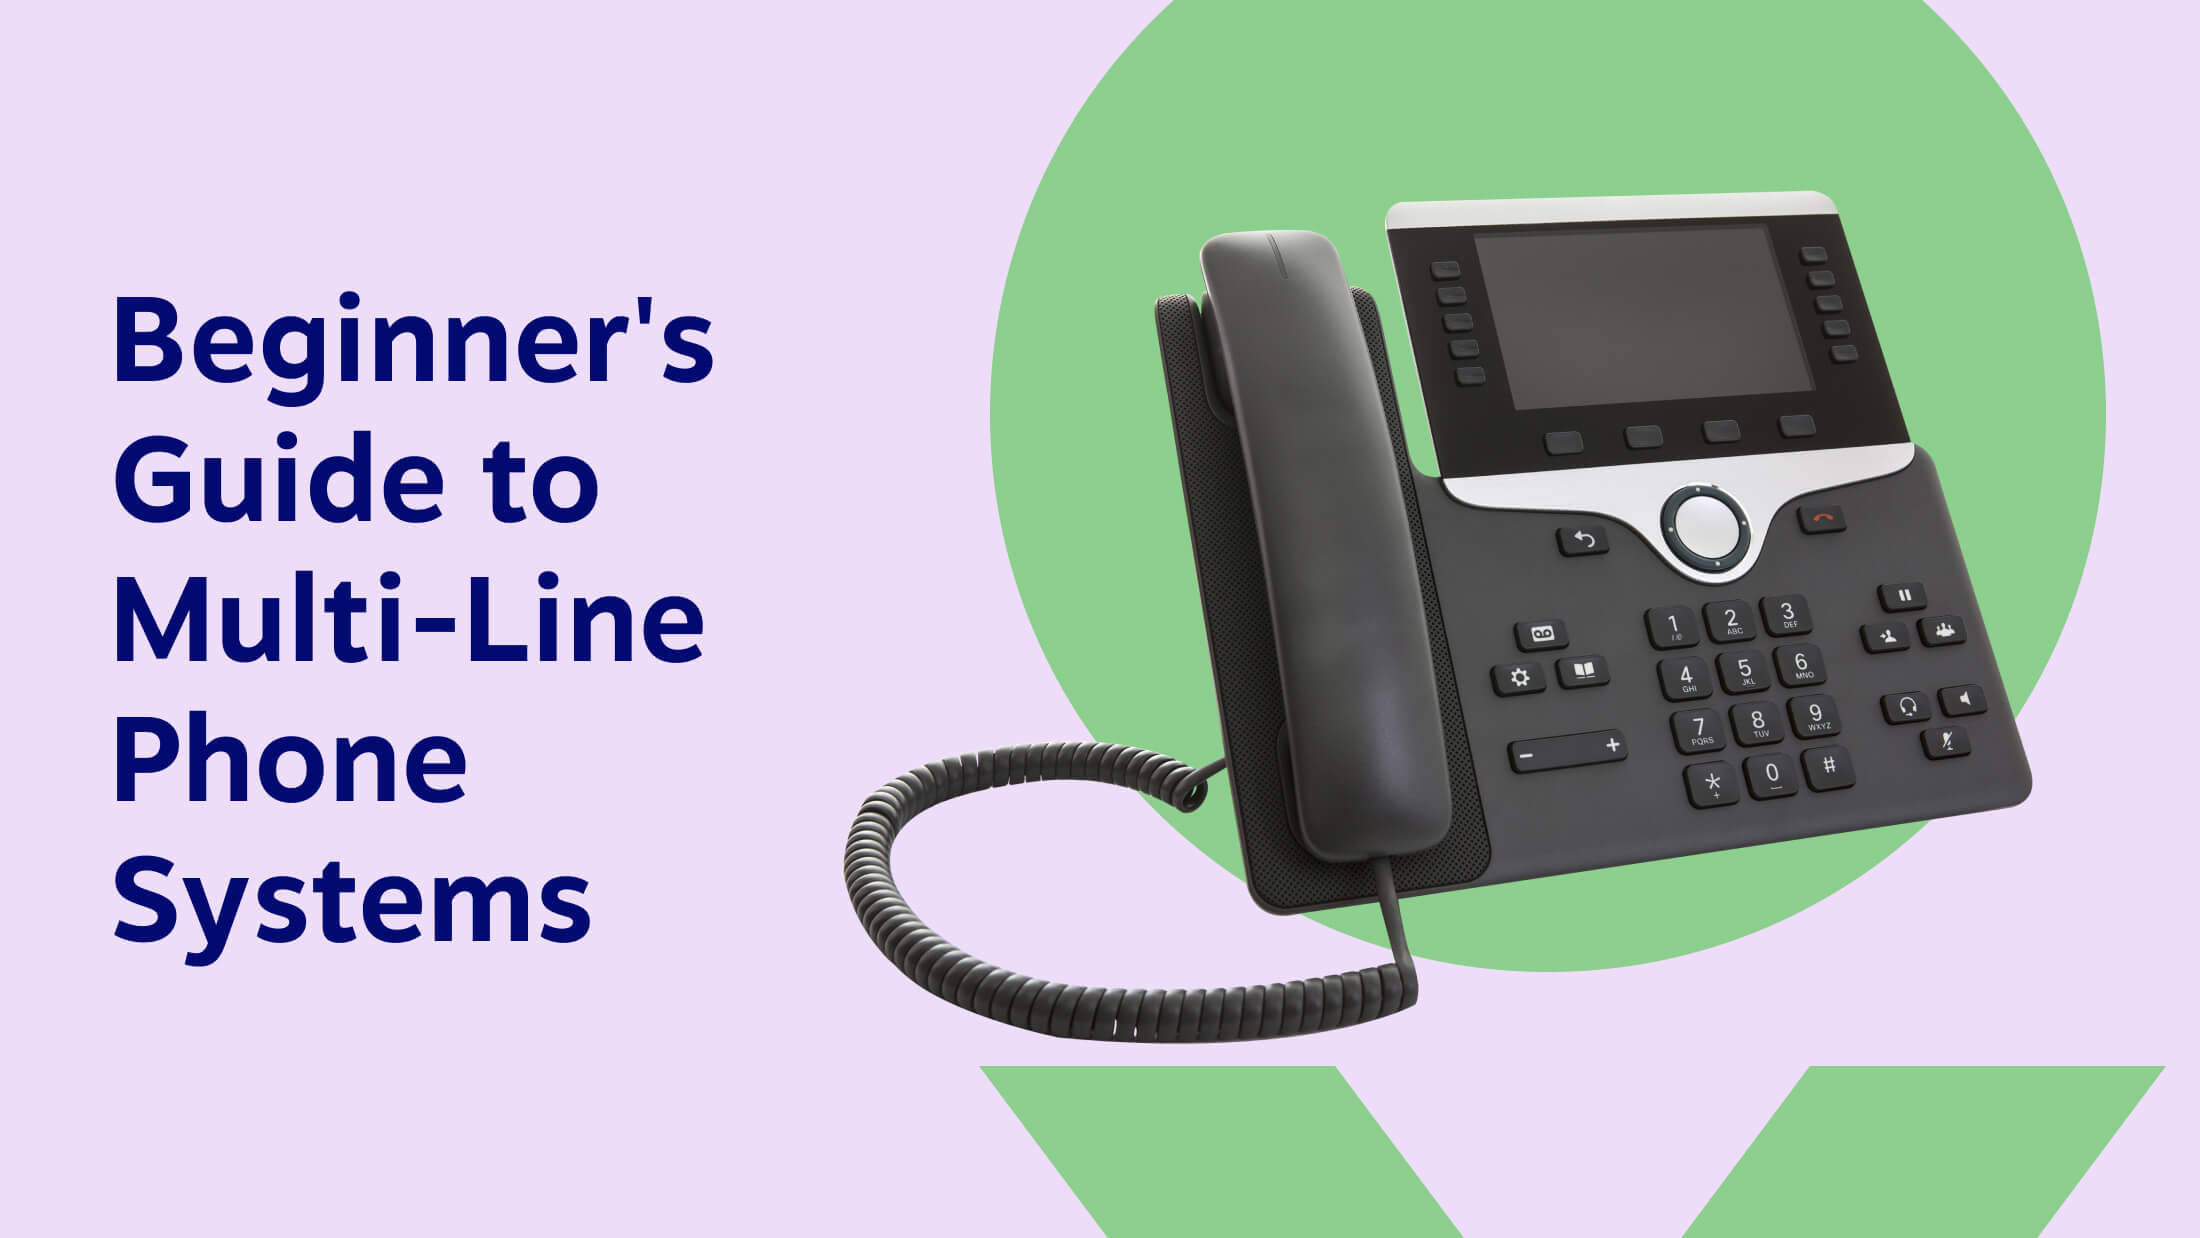 The Beginner's Guide to Multi-Line Phone Systems & Top Phone Picks